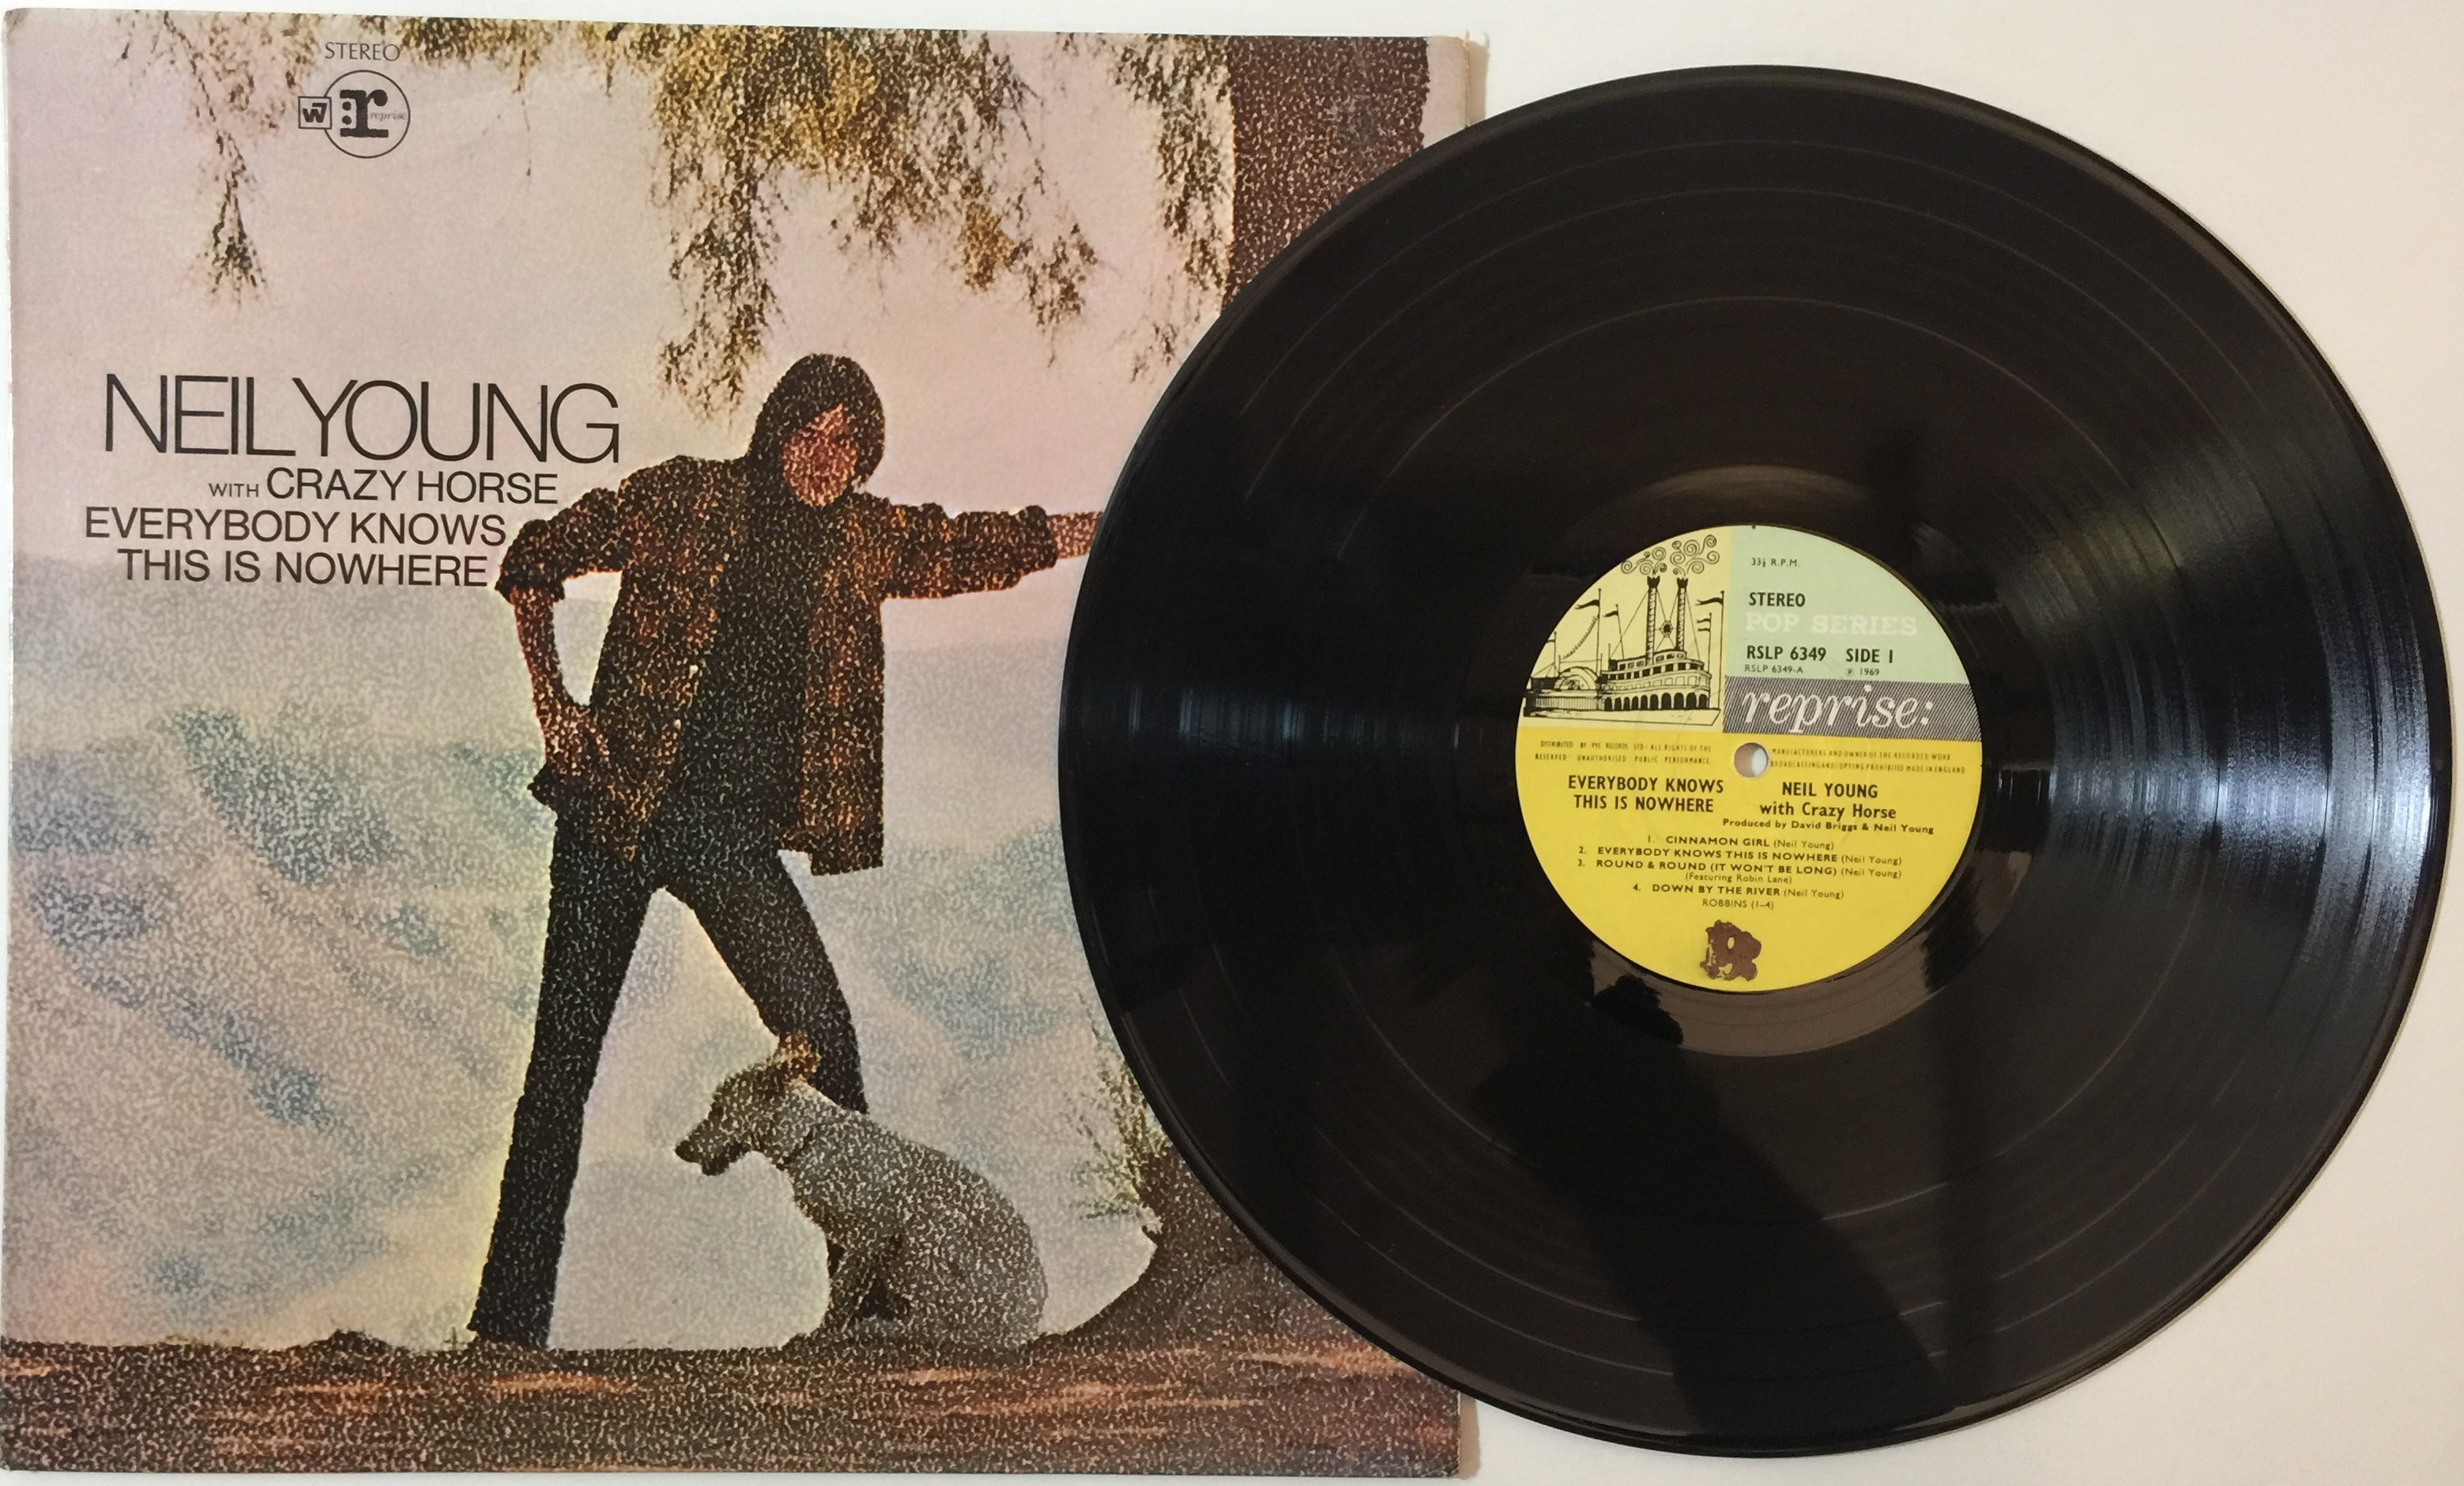 Lot 170 - NEIL YOUNG - LP COLLECTION